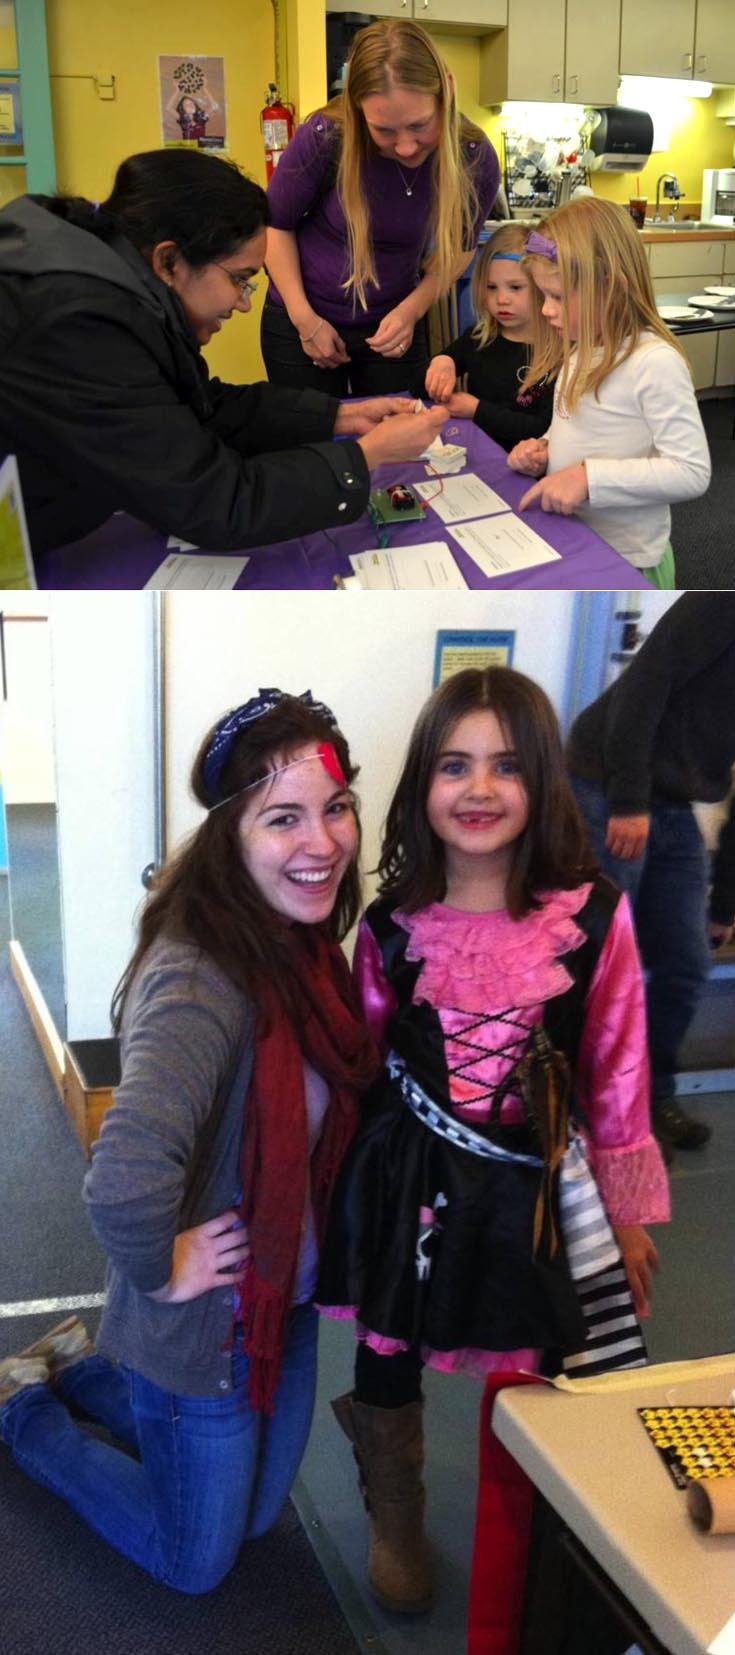 Two young girls and their mom watching a MRSEC researcher demonstrate a pirate themed activity. Bottom: A MRSEC researcher posing for a picture with a young girl in a pirate costume.